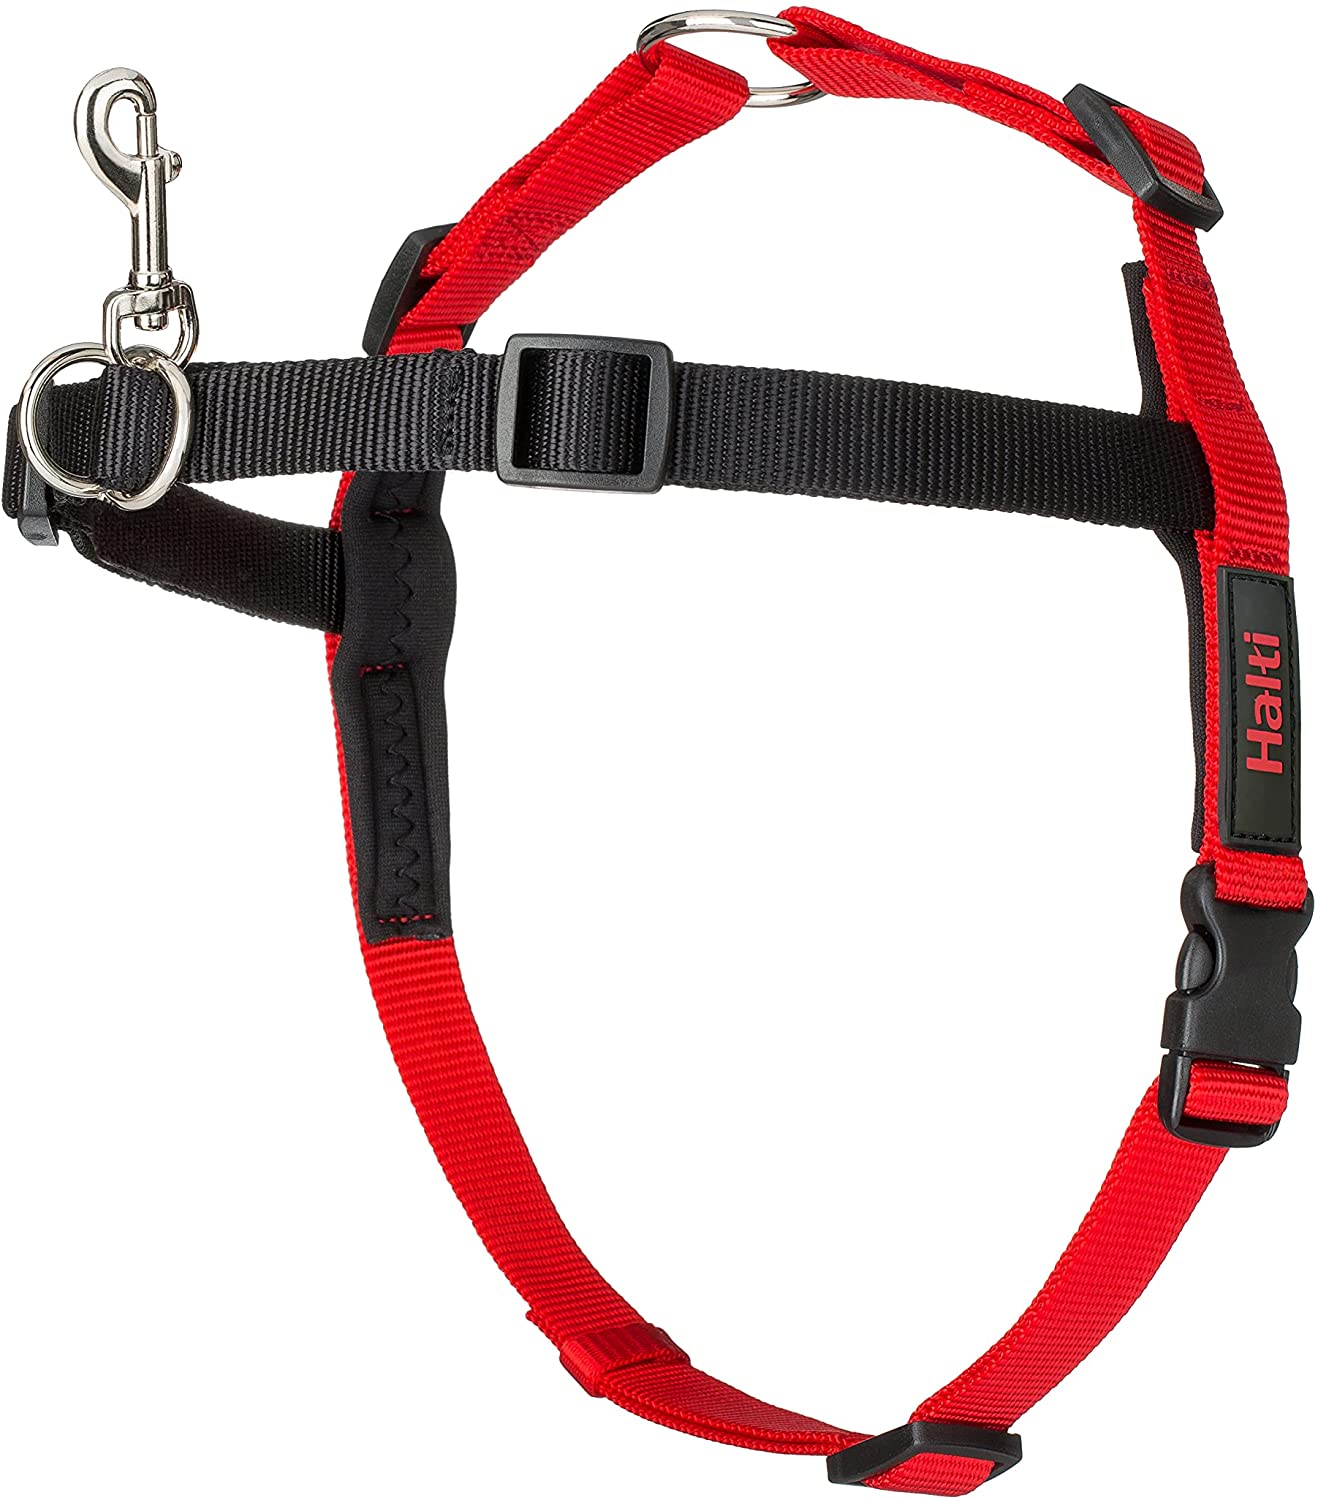 Halti Front Control Harness To Stop Pulling, Large